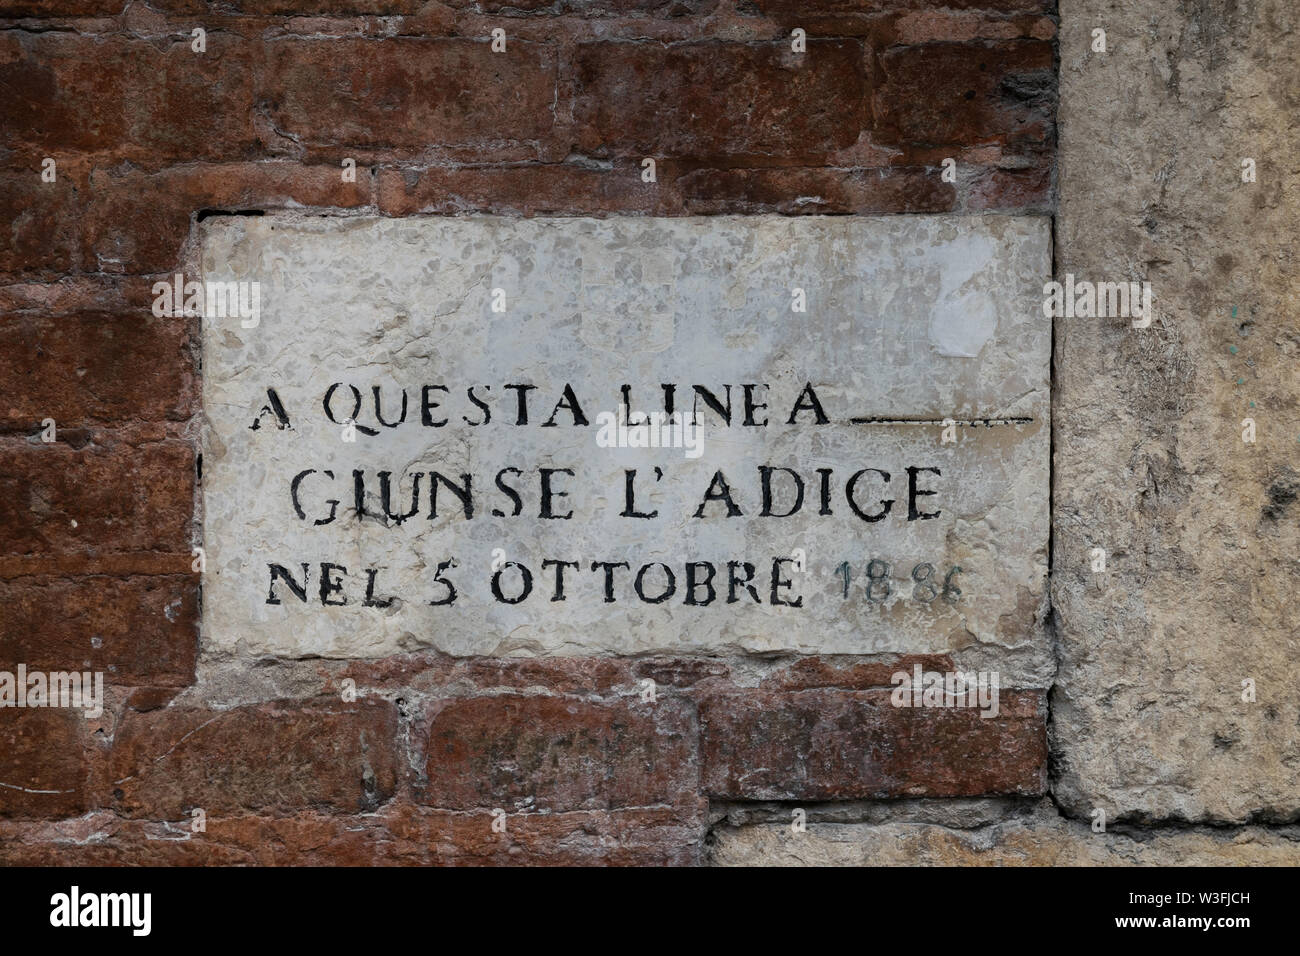 Stone on a wall marking the level of the river Adige in Verona in October 1886 Stock Photo